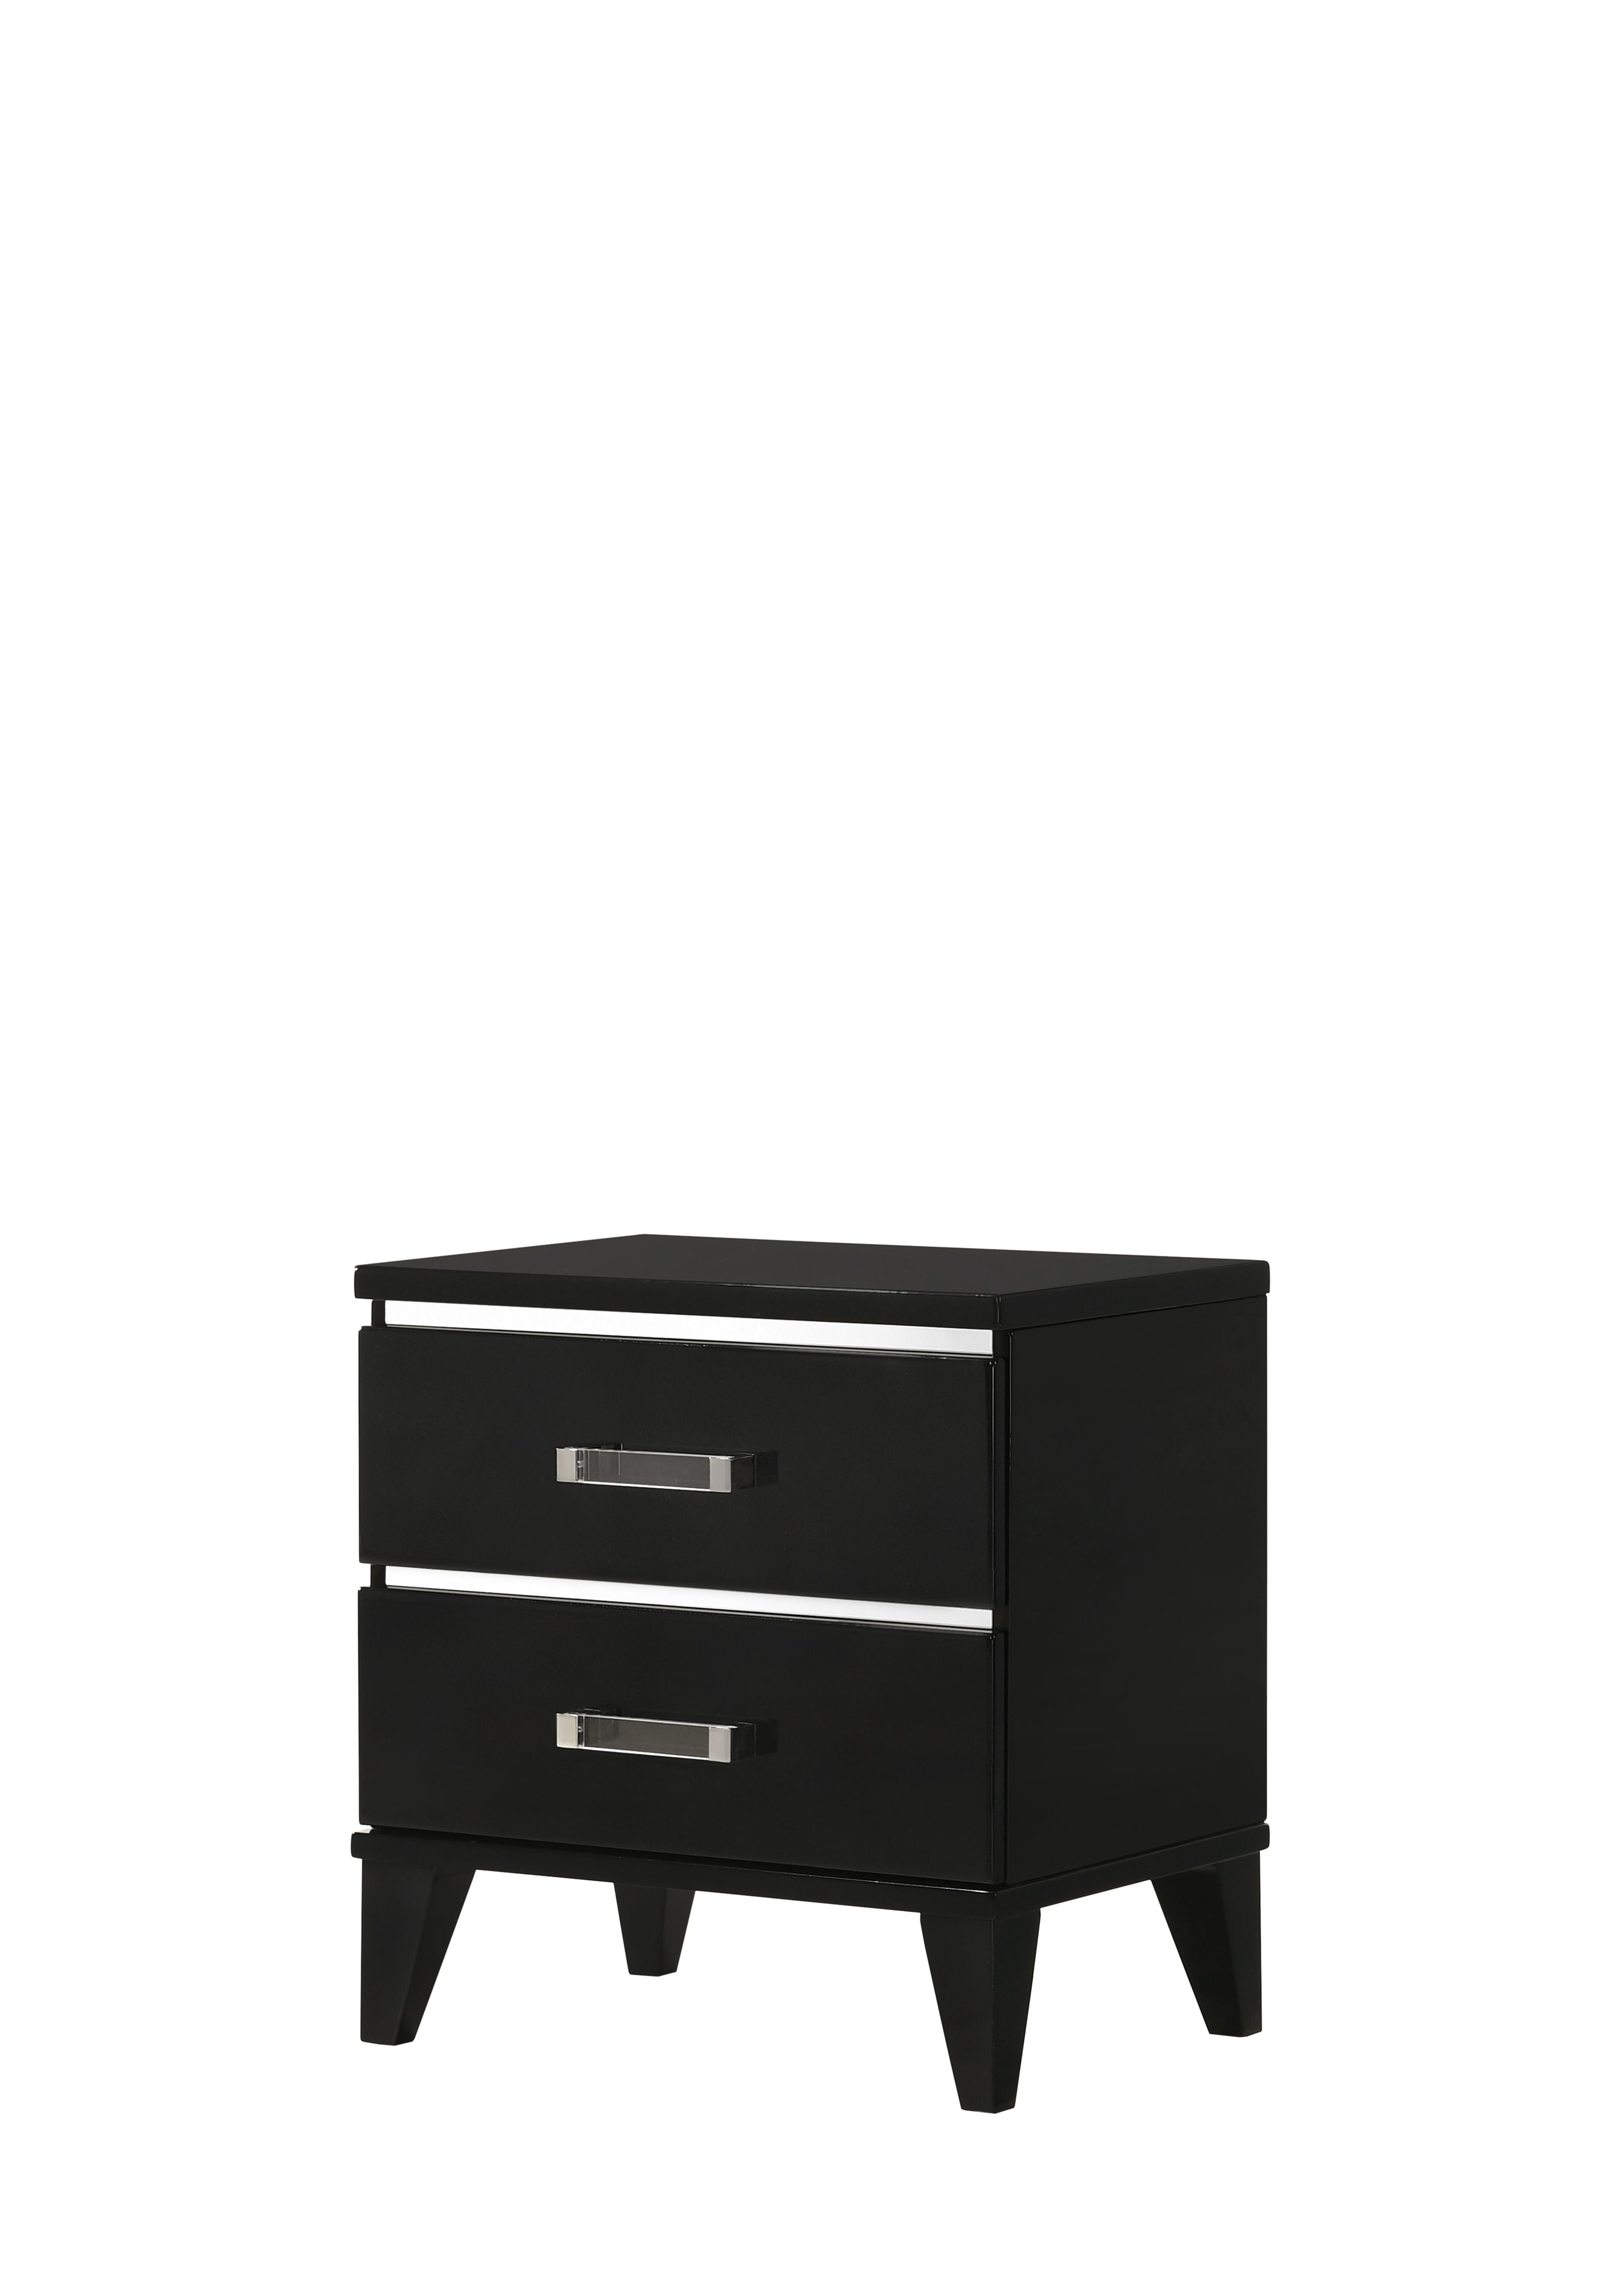 Picture of Acme Furniture 27413 23 x 16 x 23 in. Chelsie Nightstand, Black